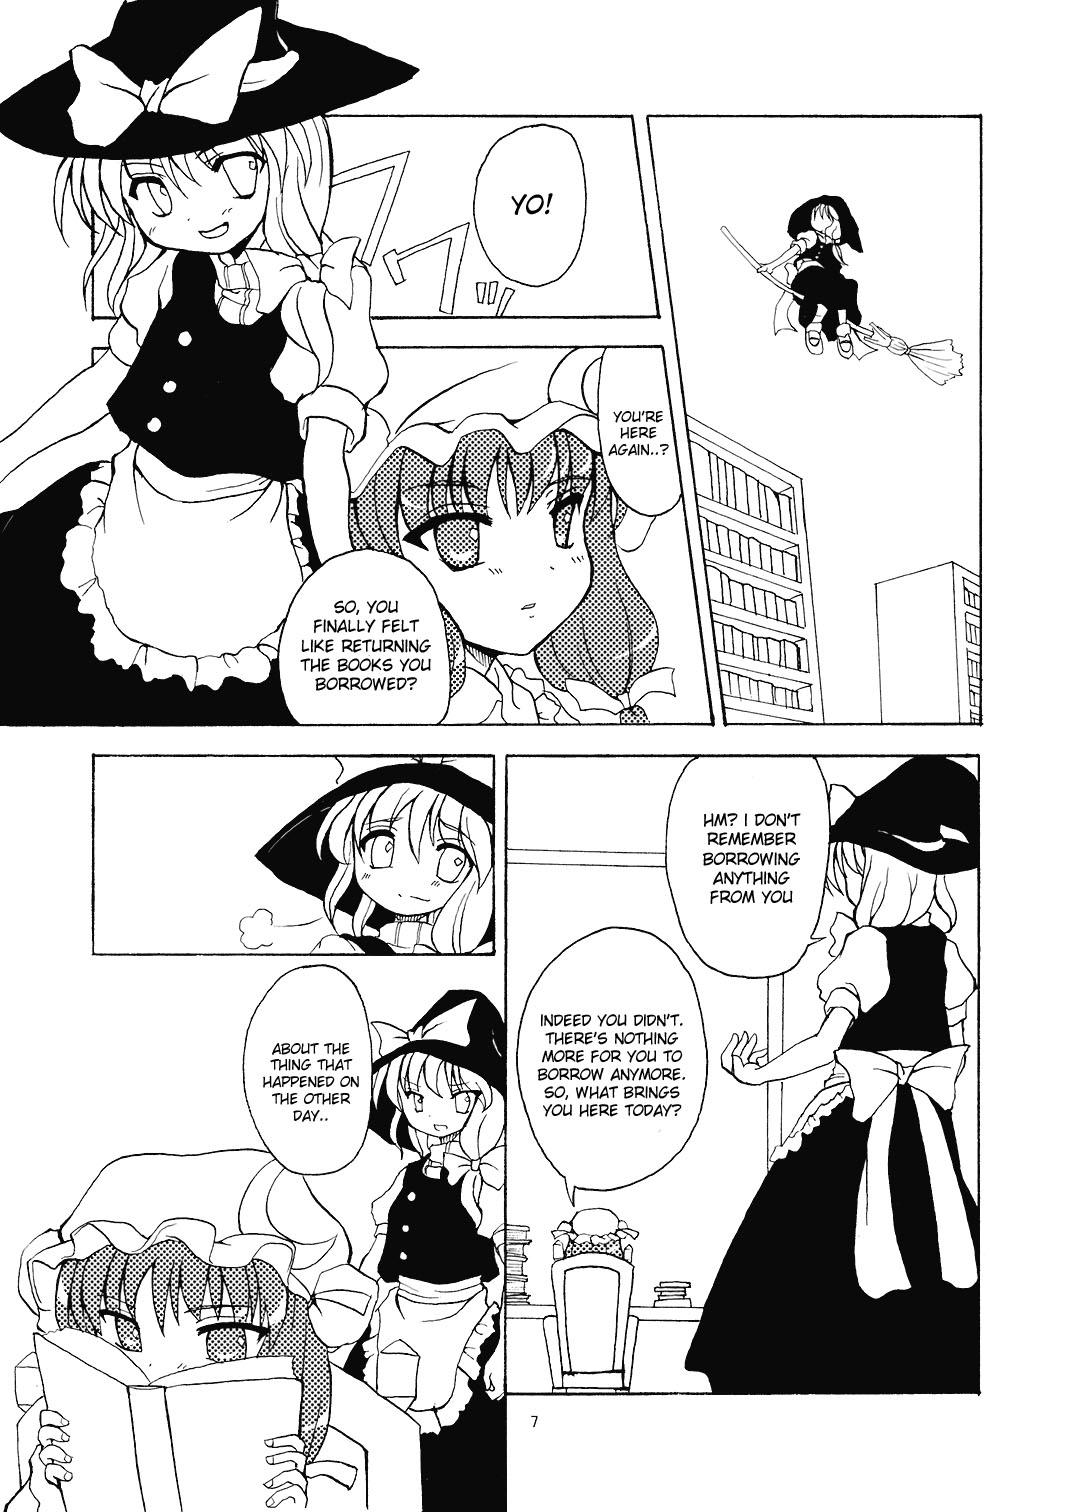 Orgy Alice in Scarlet Mansion 2 - Touhou project Indonesia - Page 7